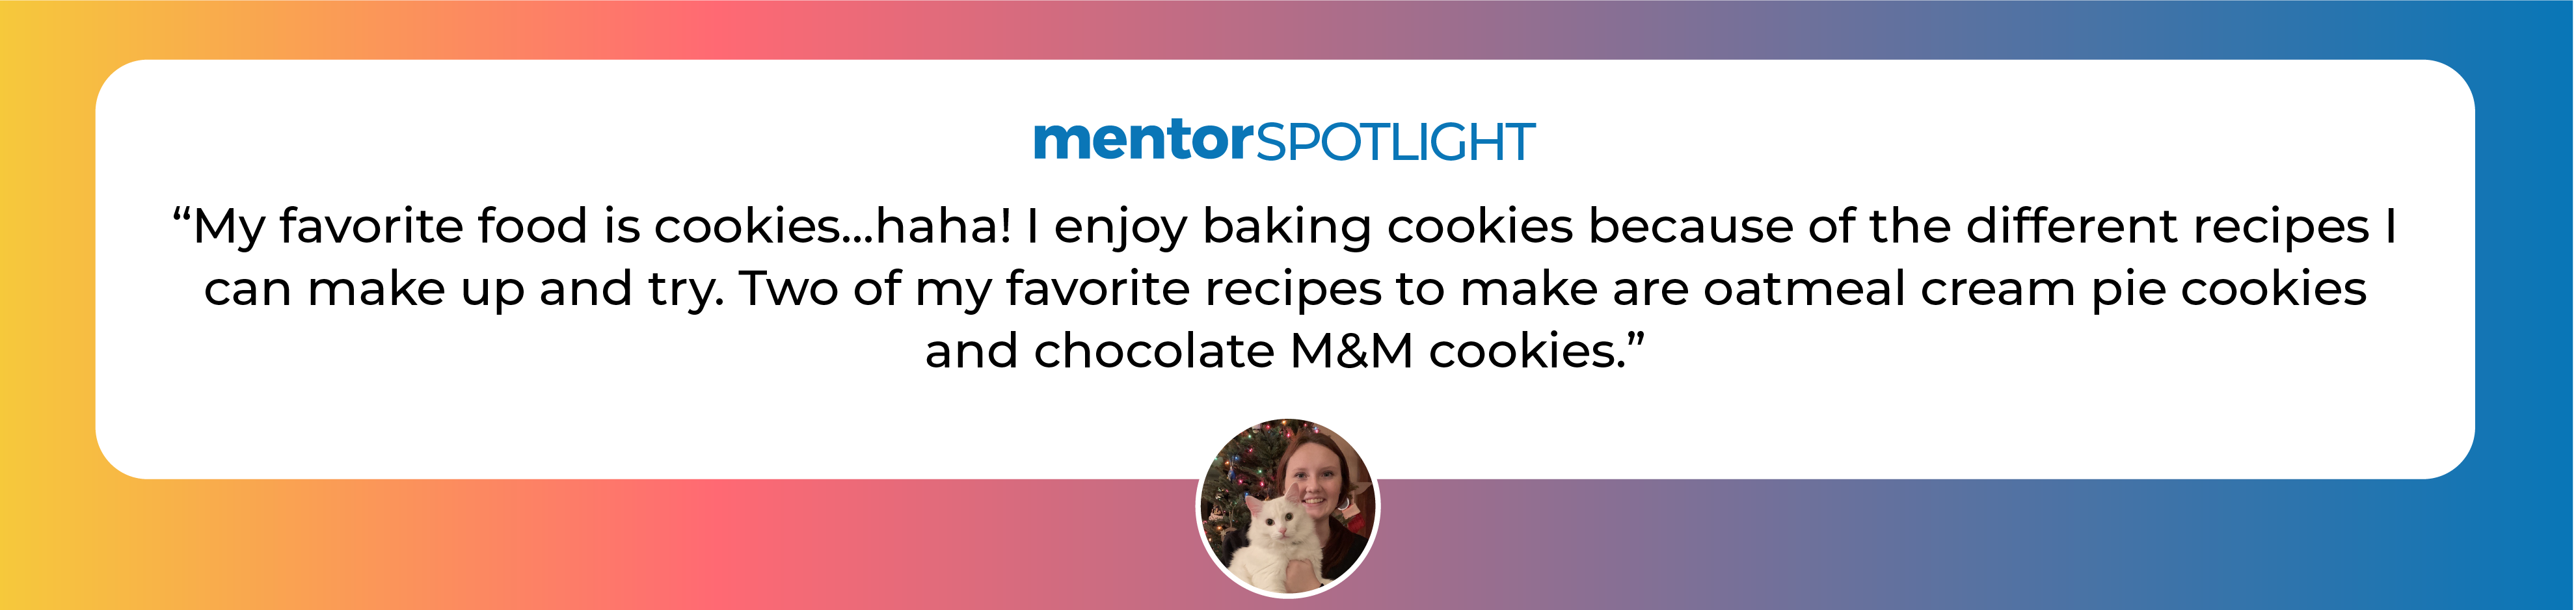 My favorite food is cookies...haha! I enjoy baking cookies because of the different recipes I can make up and try. Two of my favorite recipes to make are oatmeal cream pie cookies and chocolate M&M cookies.